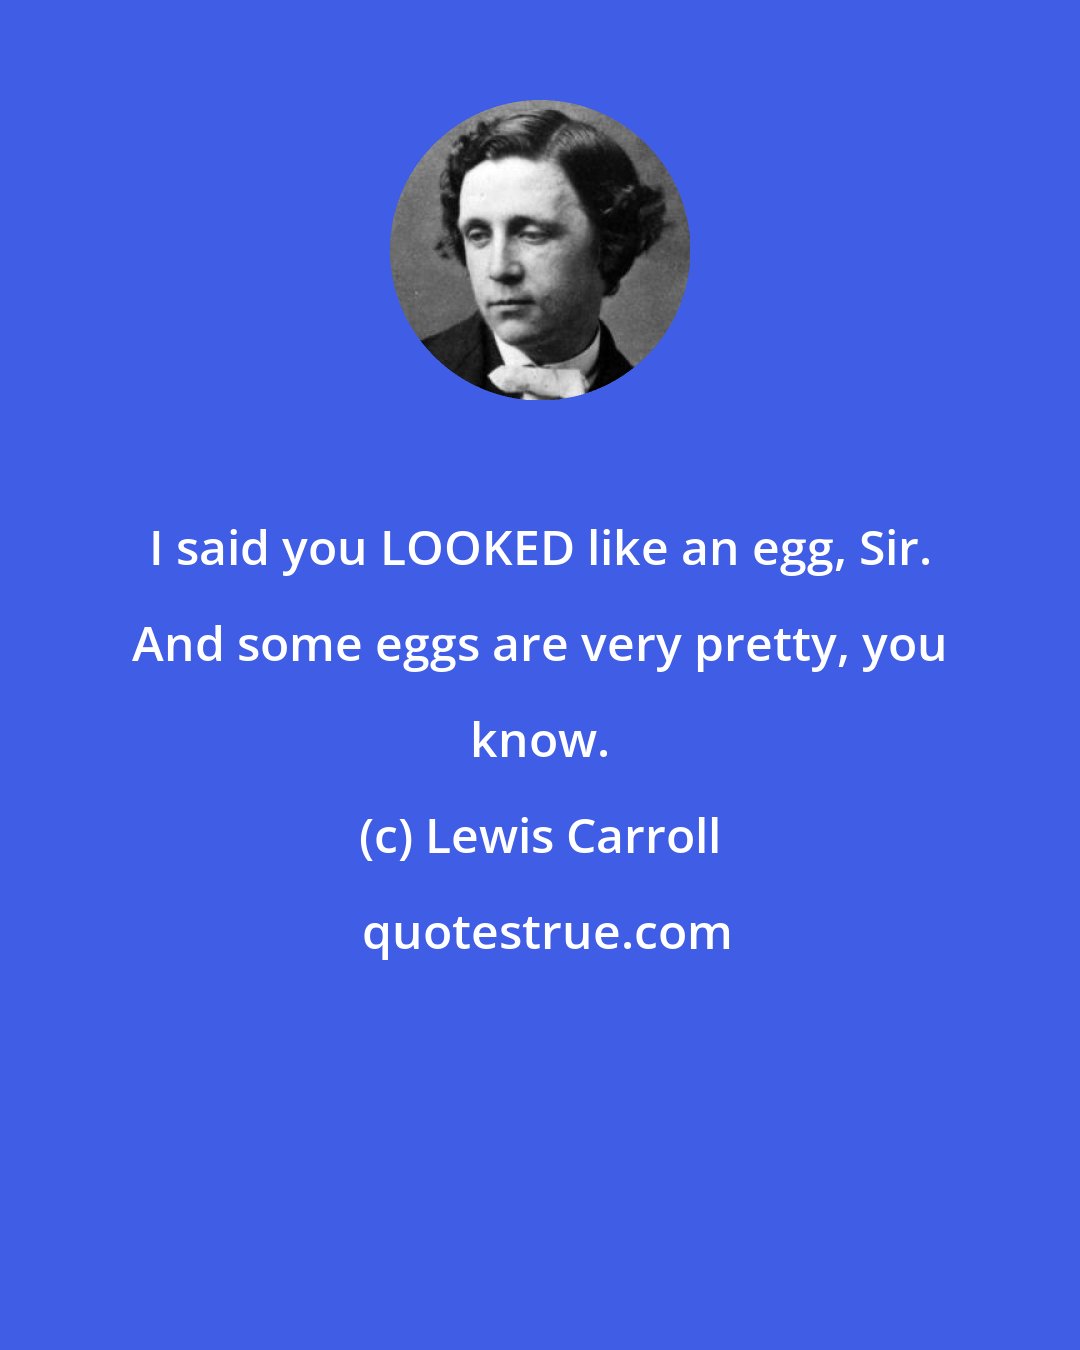 Lewis Carroll: I said you LOOKED like an egg, Sir. And some eggs are very pretty, you know.